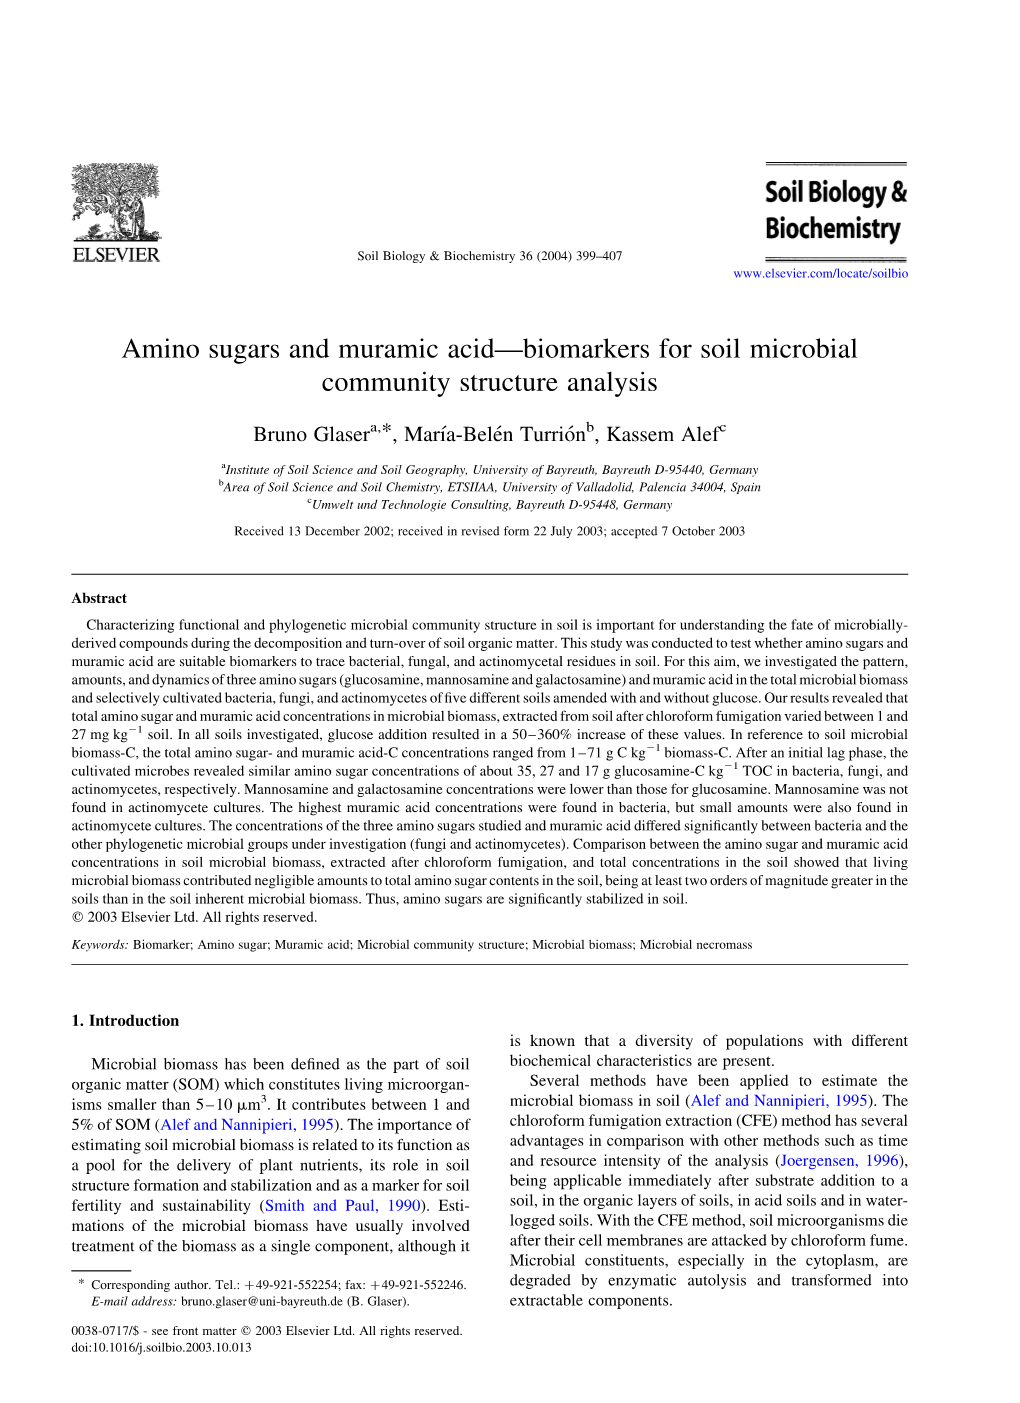 Amino Sugars and Muramic Acid—Biomarkers for Soil Microbial Community Structure Analysis